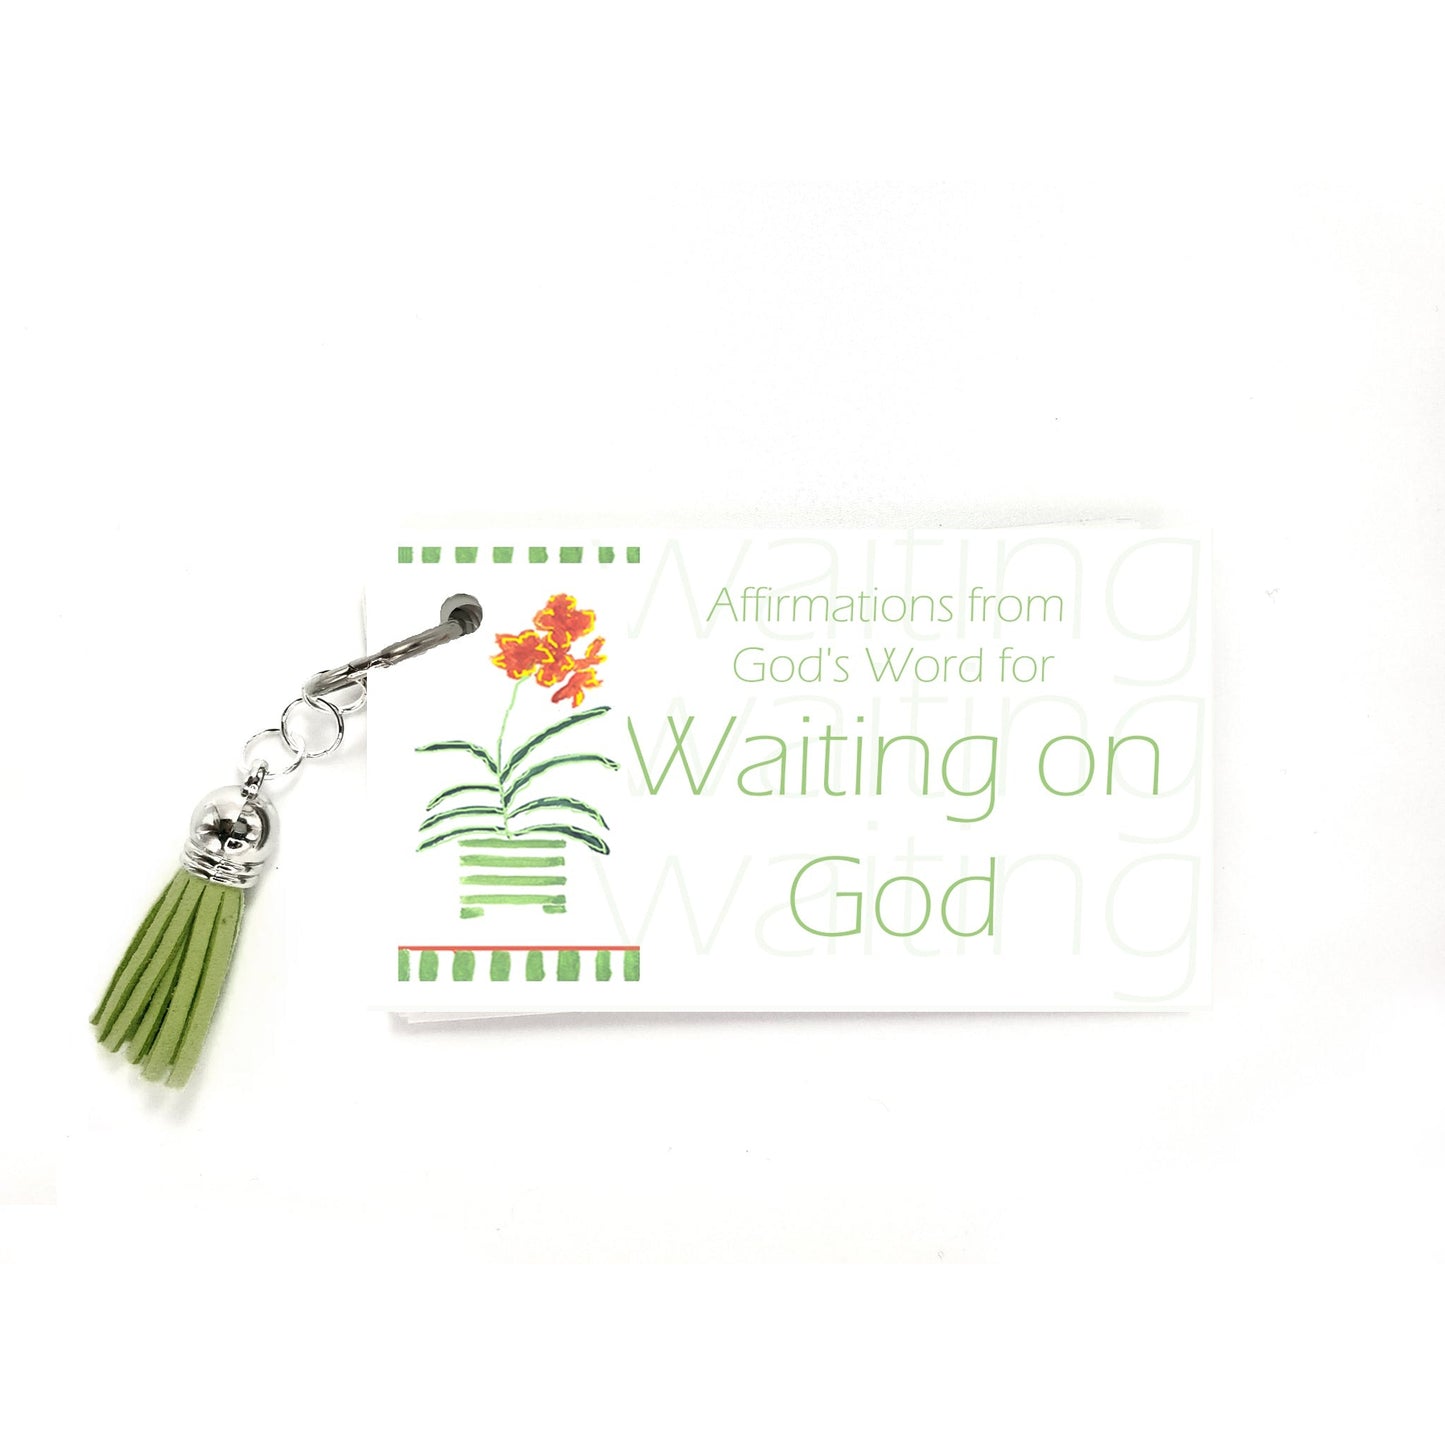 Affirmations from God - Waiting on God